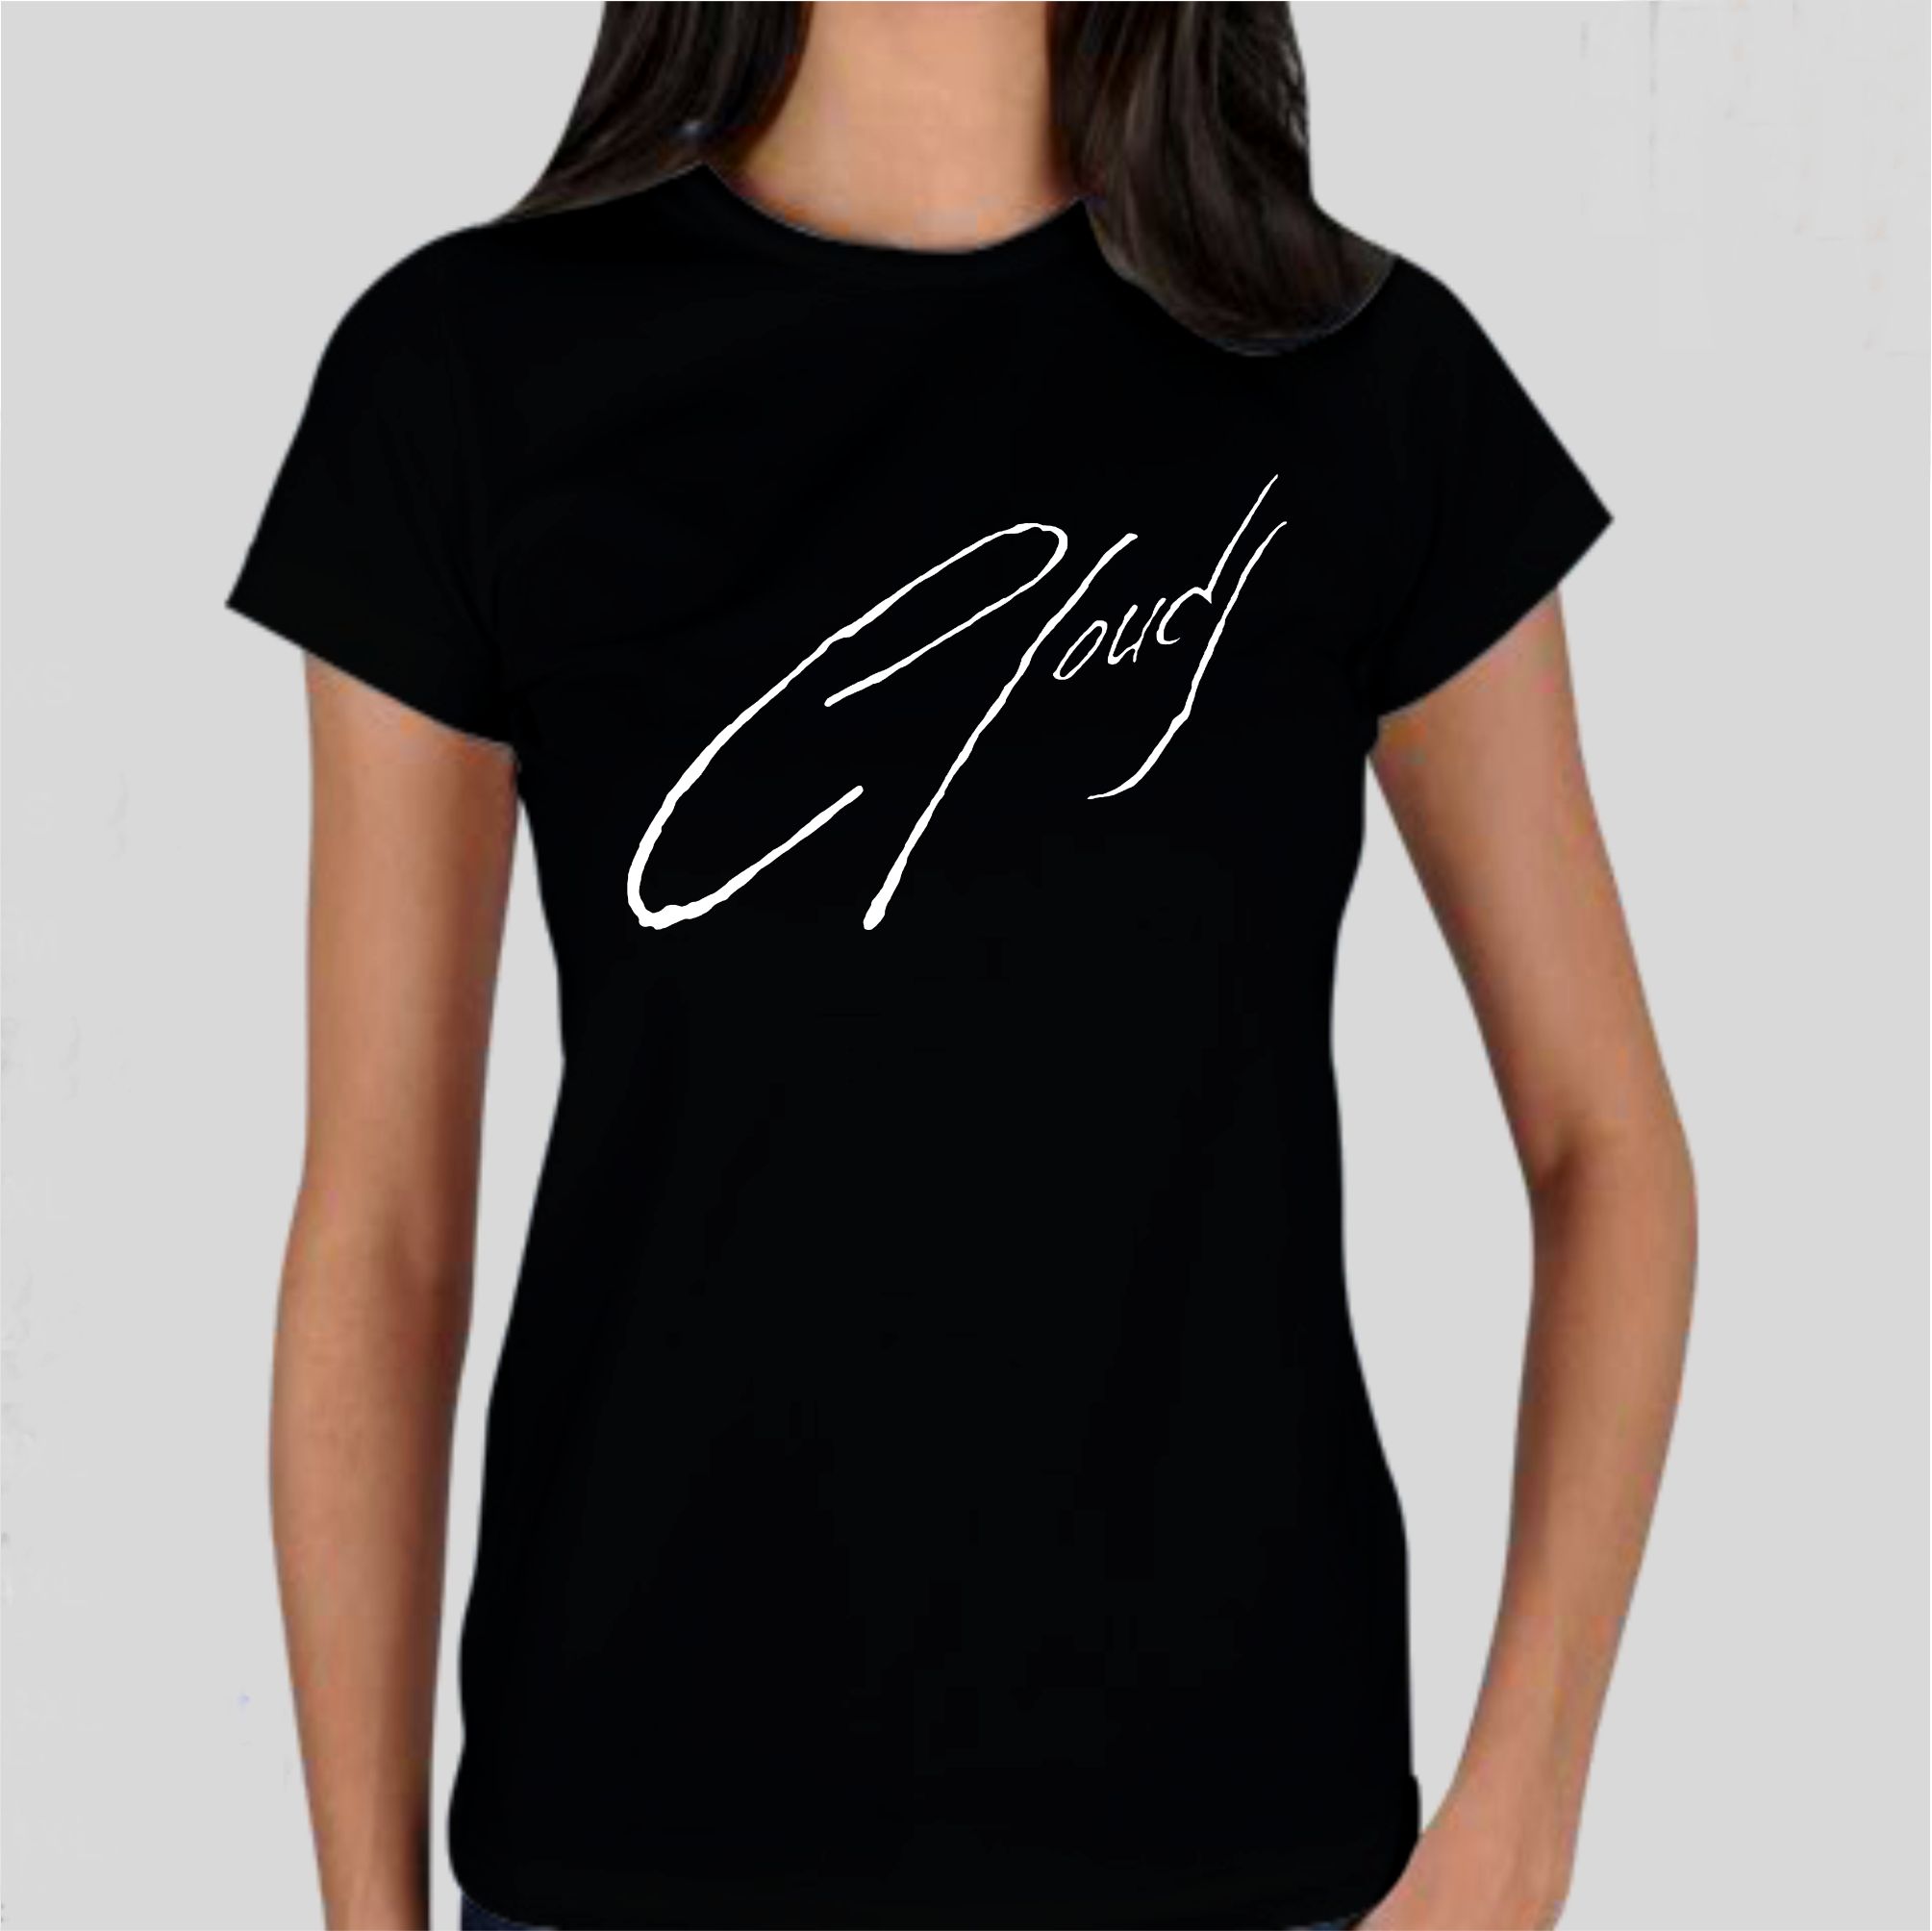 Clouds Logo girlie t-shirt – Metal & Rock T-shirts and Accessories